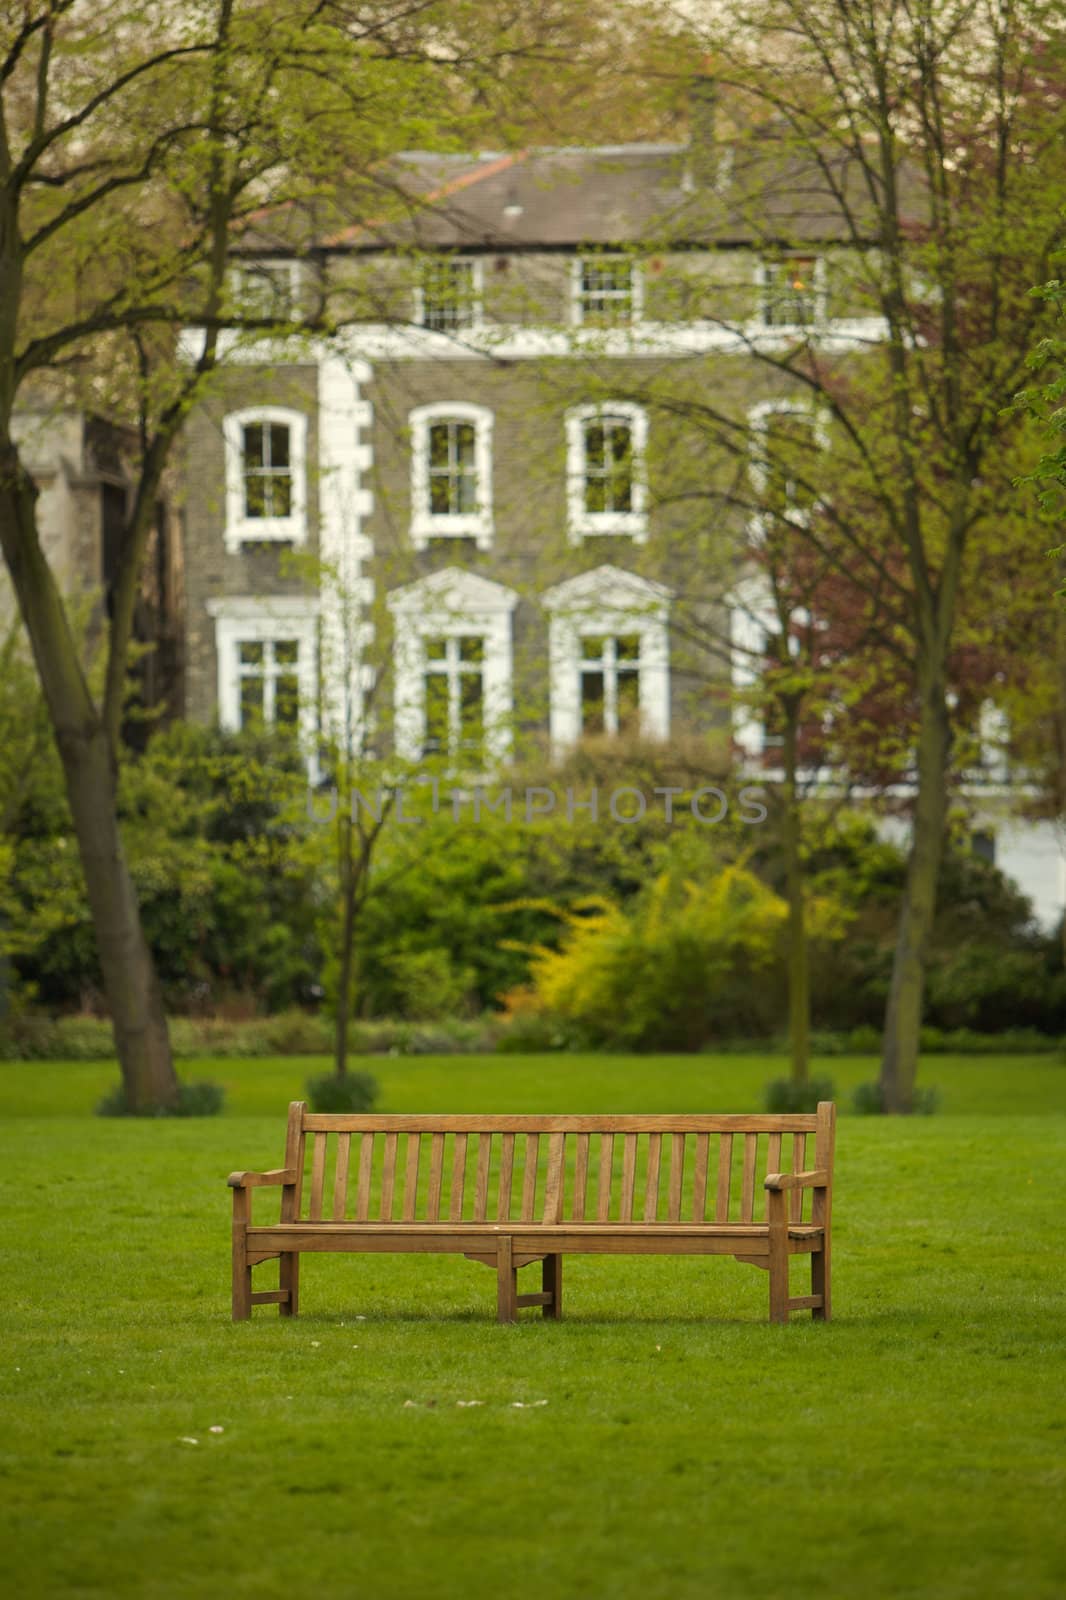 Wooden bench in a park with a grand home in the background